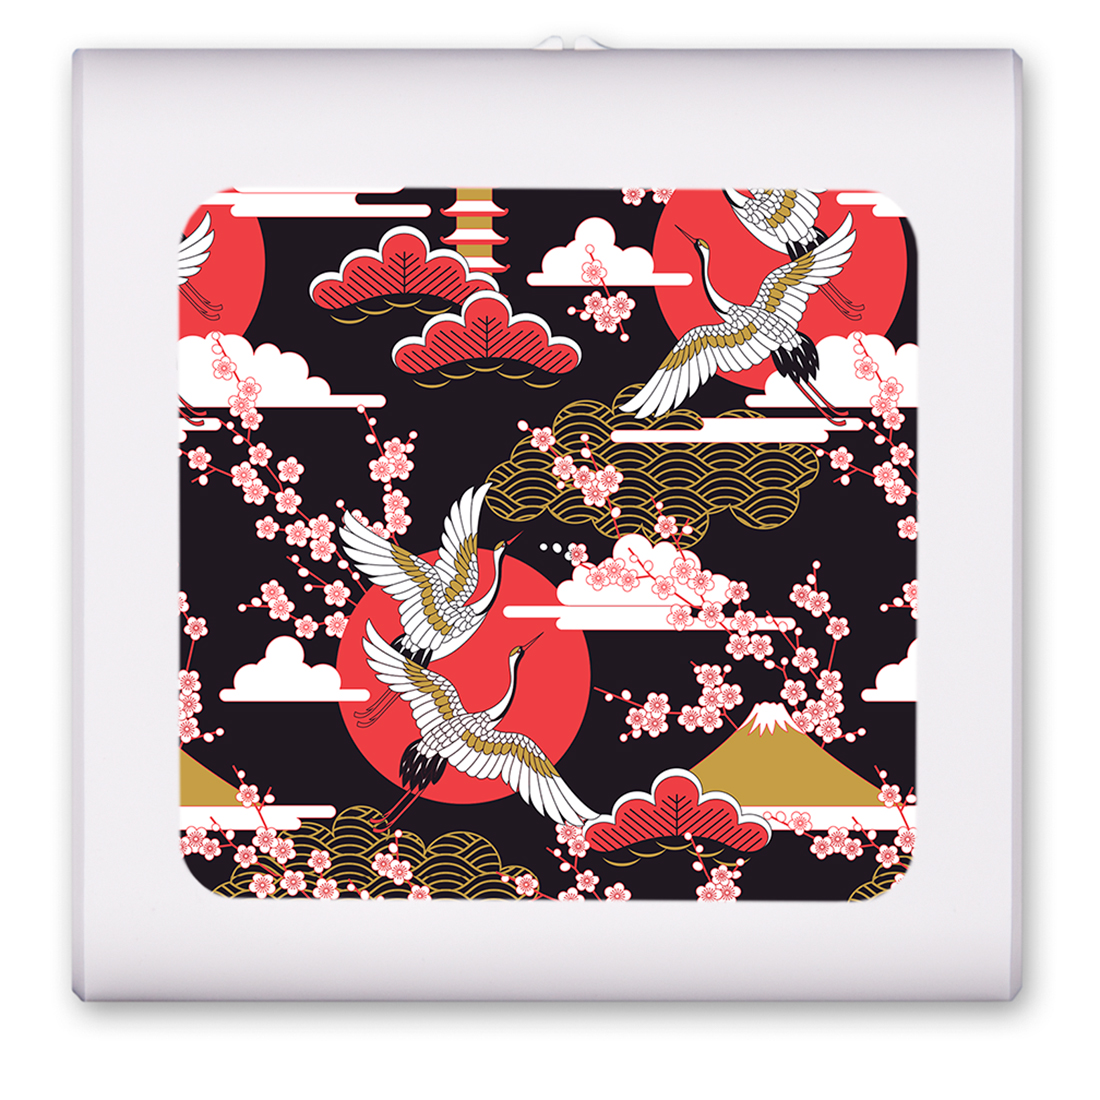 Red White and Gold Flying Cranes - #2786